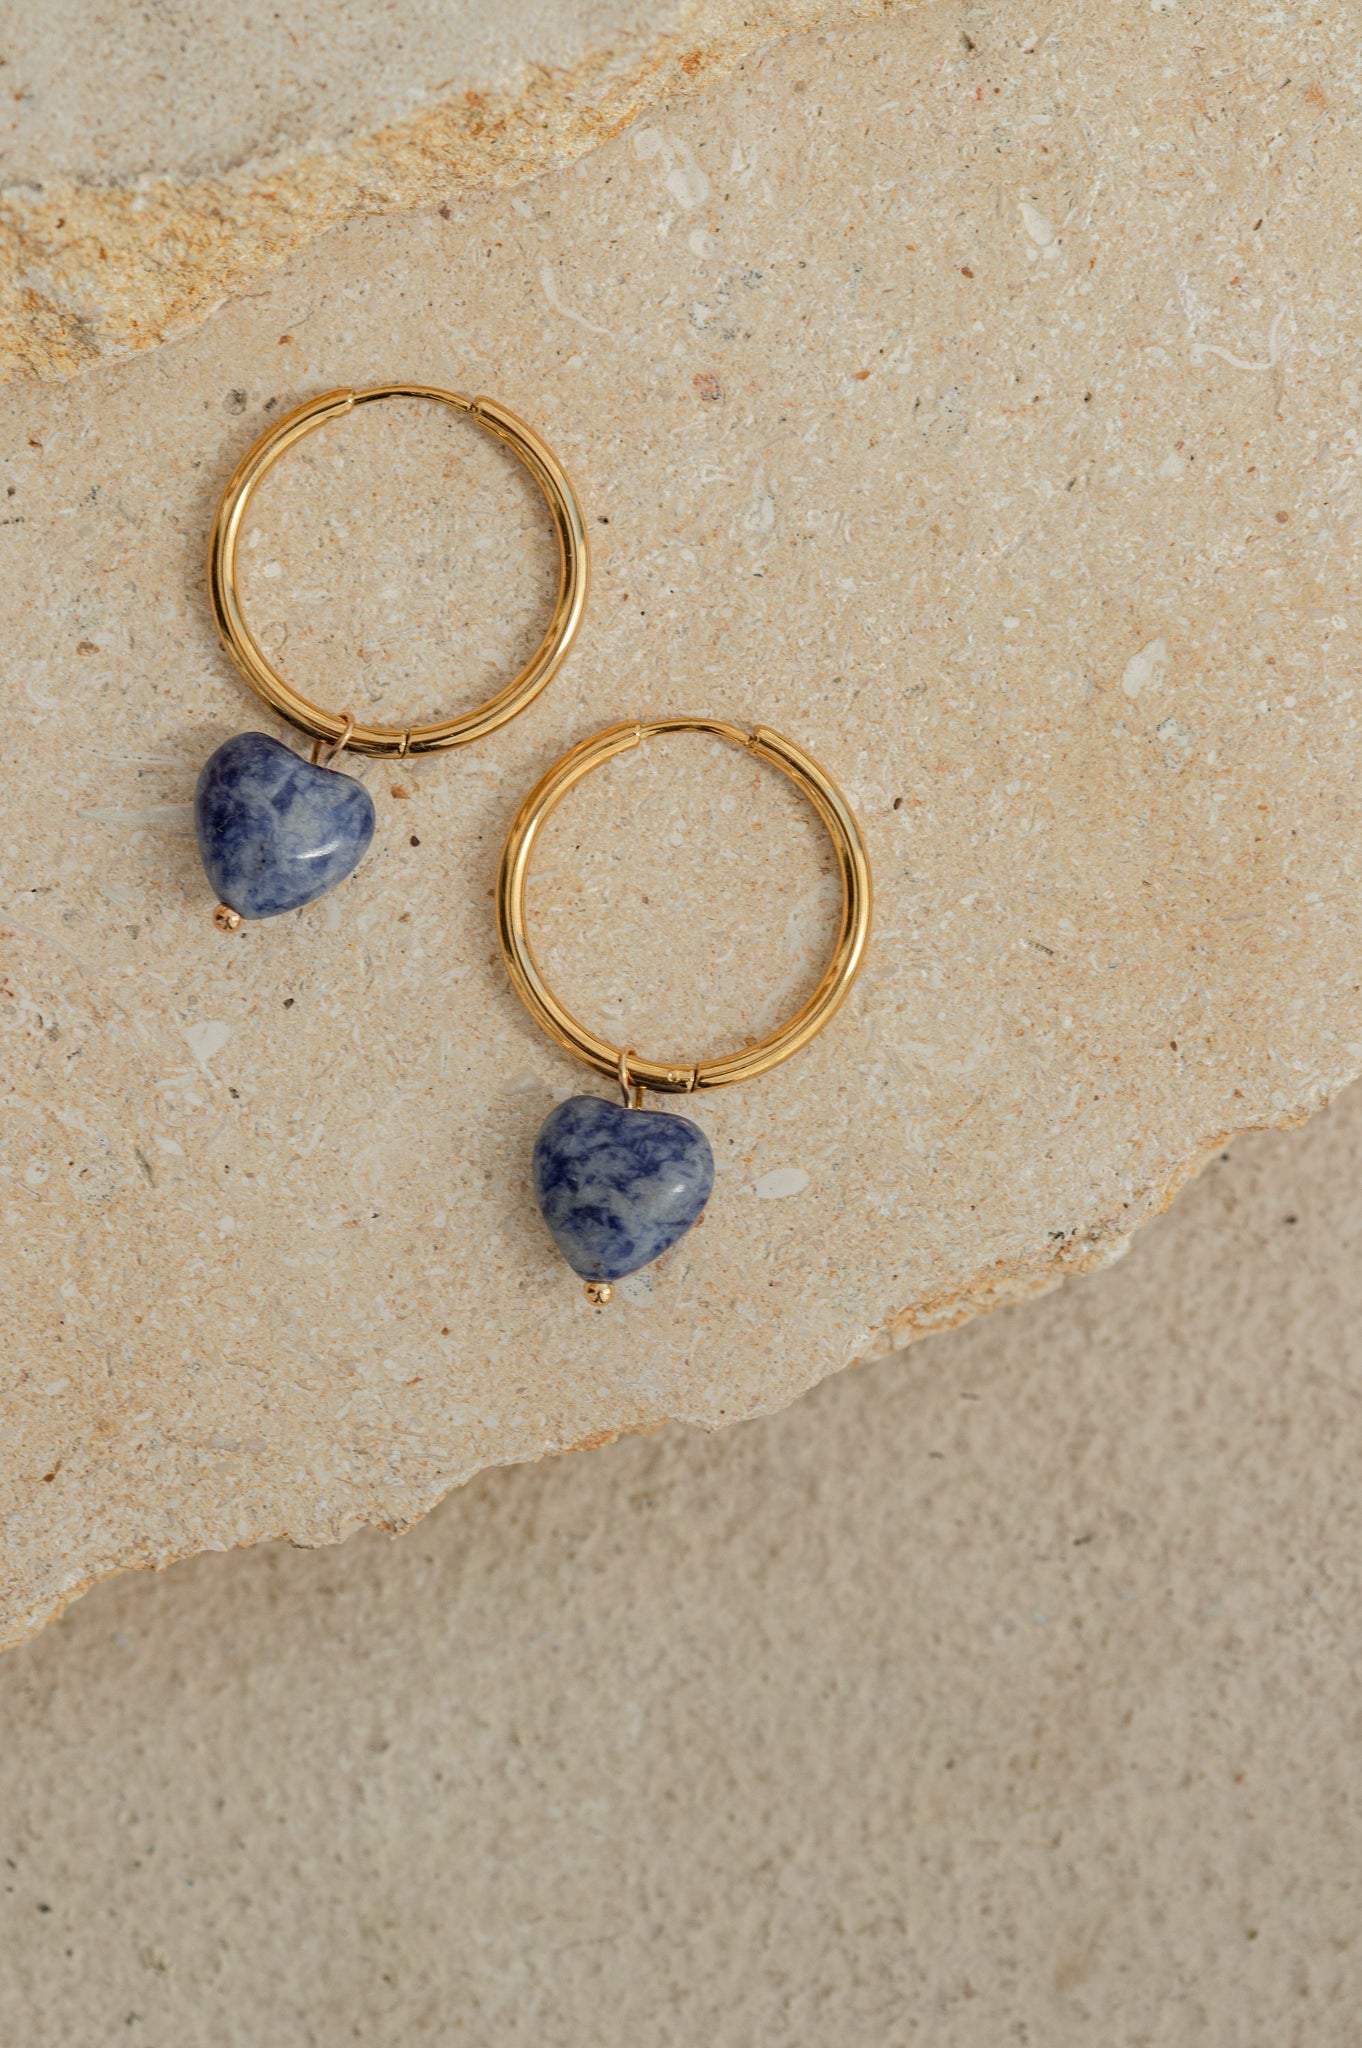 Natural Stone Heart Earrings, 18K Gold, Step Mom Gift, Dainty Earrings, Mothers Day Gift, Colorful Hoop Earrings, Handmade Jewelry For Mom